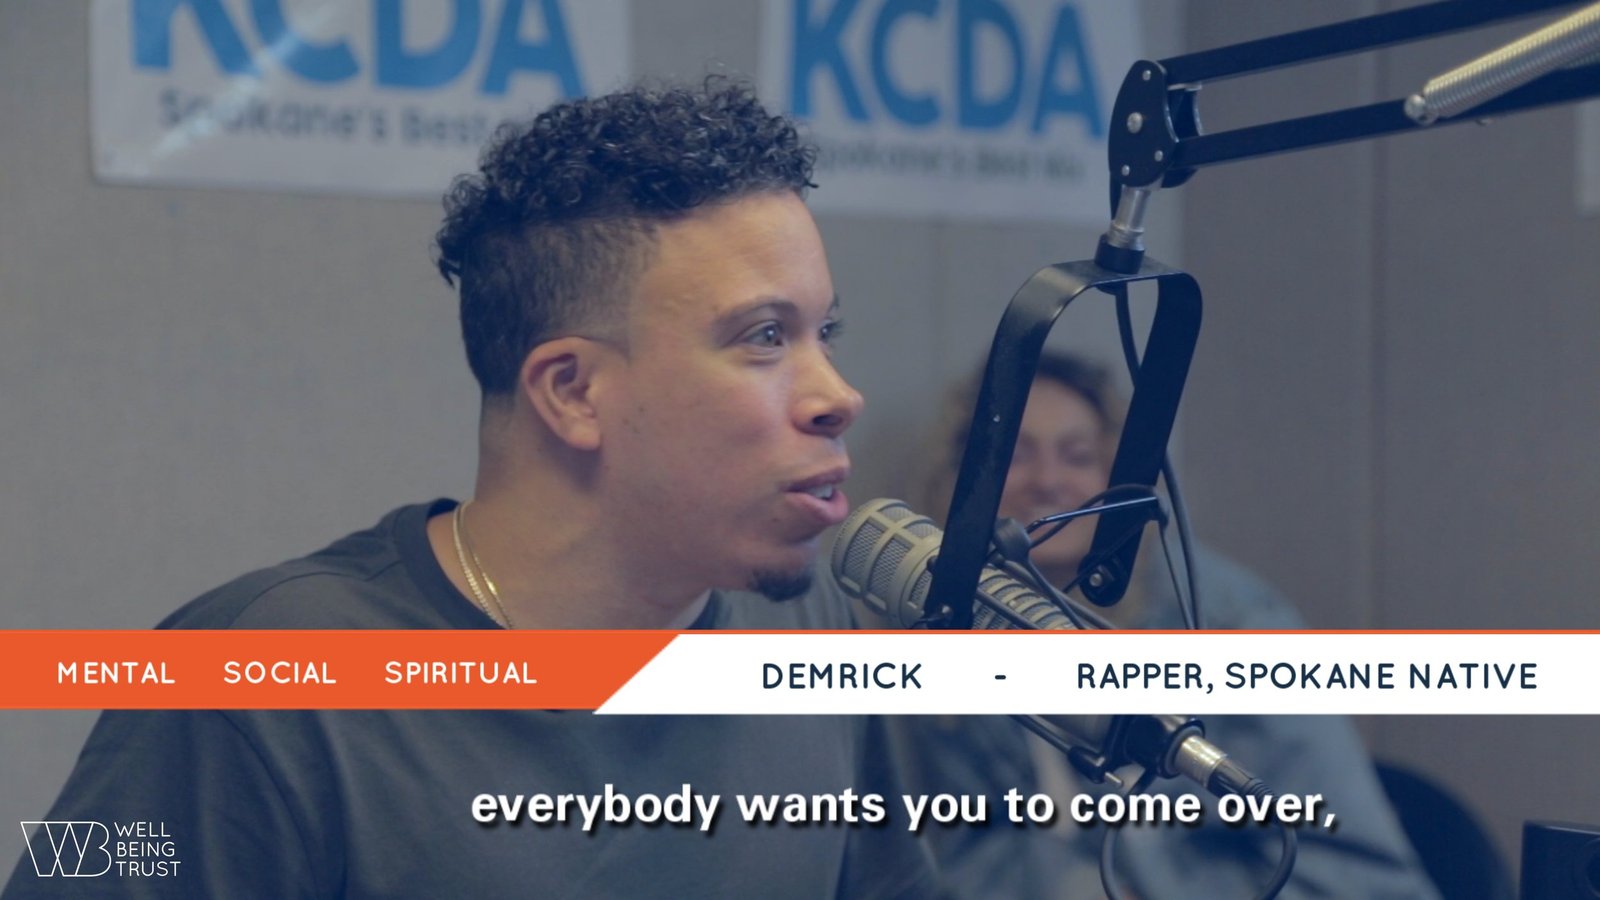 VIDEO: Demrick chats with iHeart radio’s DJ CJ Miller on how he works to #BeWell